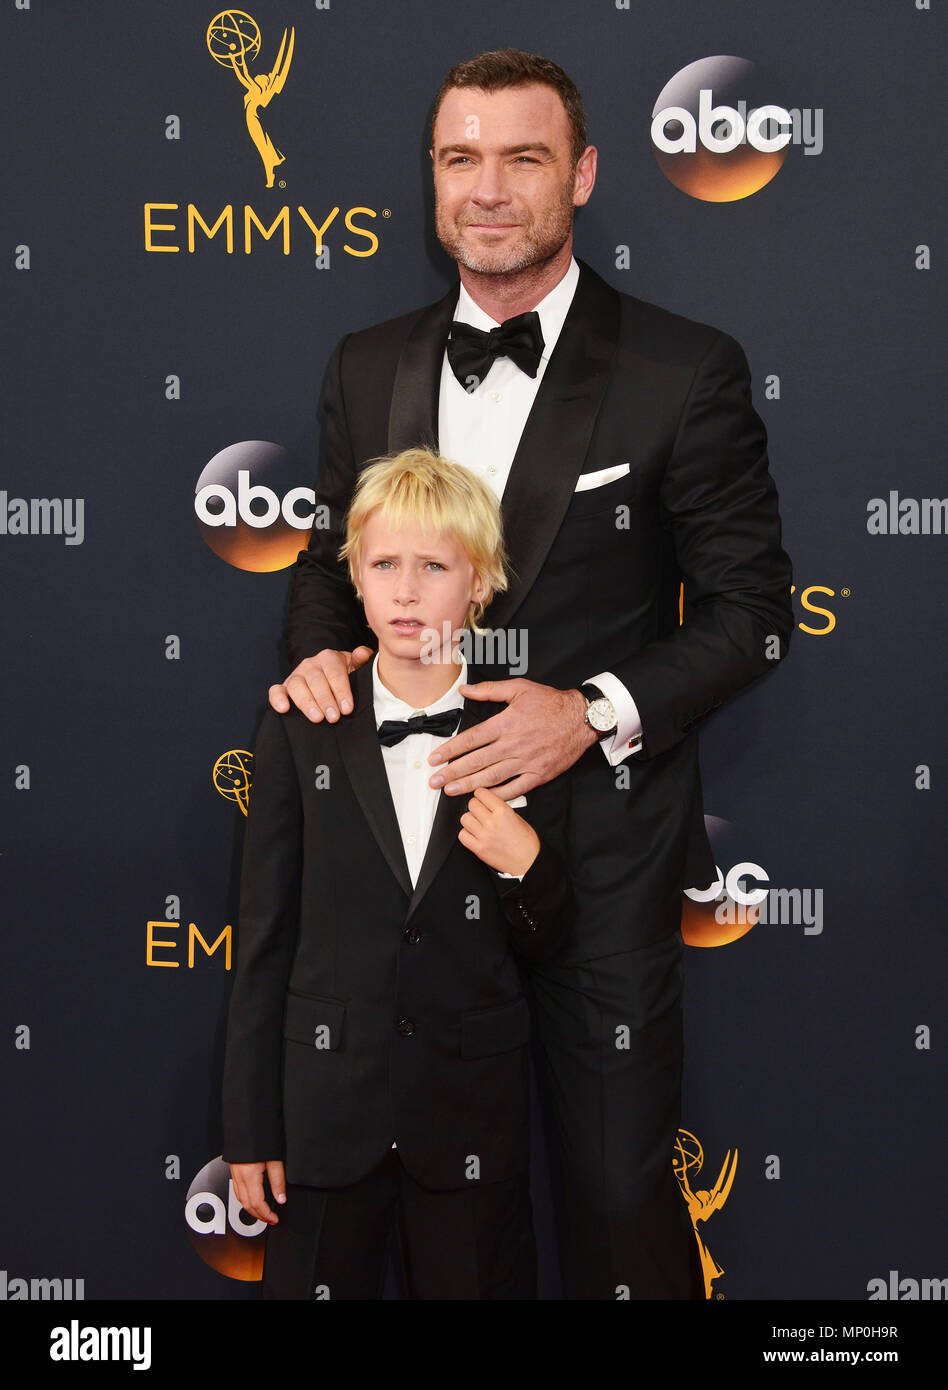 Liev Schreiber, Alexander Schreiber 254 at the 68th Emmy Awards 2016 at the Microsoft Theatre in Los Angeles. September 18, 2016.Liev Schreiber, Alexander Schreiber 254 ------------- Red Carpet Event, Vertical, USA, Film Industry, Celebrities,  Photography, Bestof, Arts Culture and Entertainment, Topix Celebrities fashion /  Vertical, Best of, Event in Hollywood Life - California,  Red Carpet and backstage, USA, Film Industry, Celebrities,  movie celebrities, TV celebrities, Music celebrities, Photography, Bestof, Arts Culture and Entertainment,  Topix, vertical,  family from from the year , 2 Stock Photo